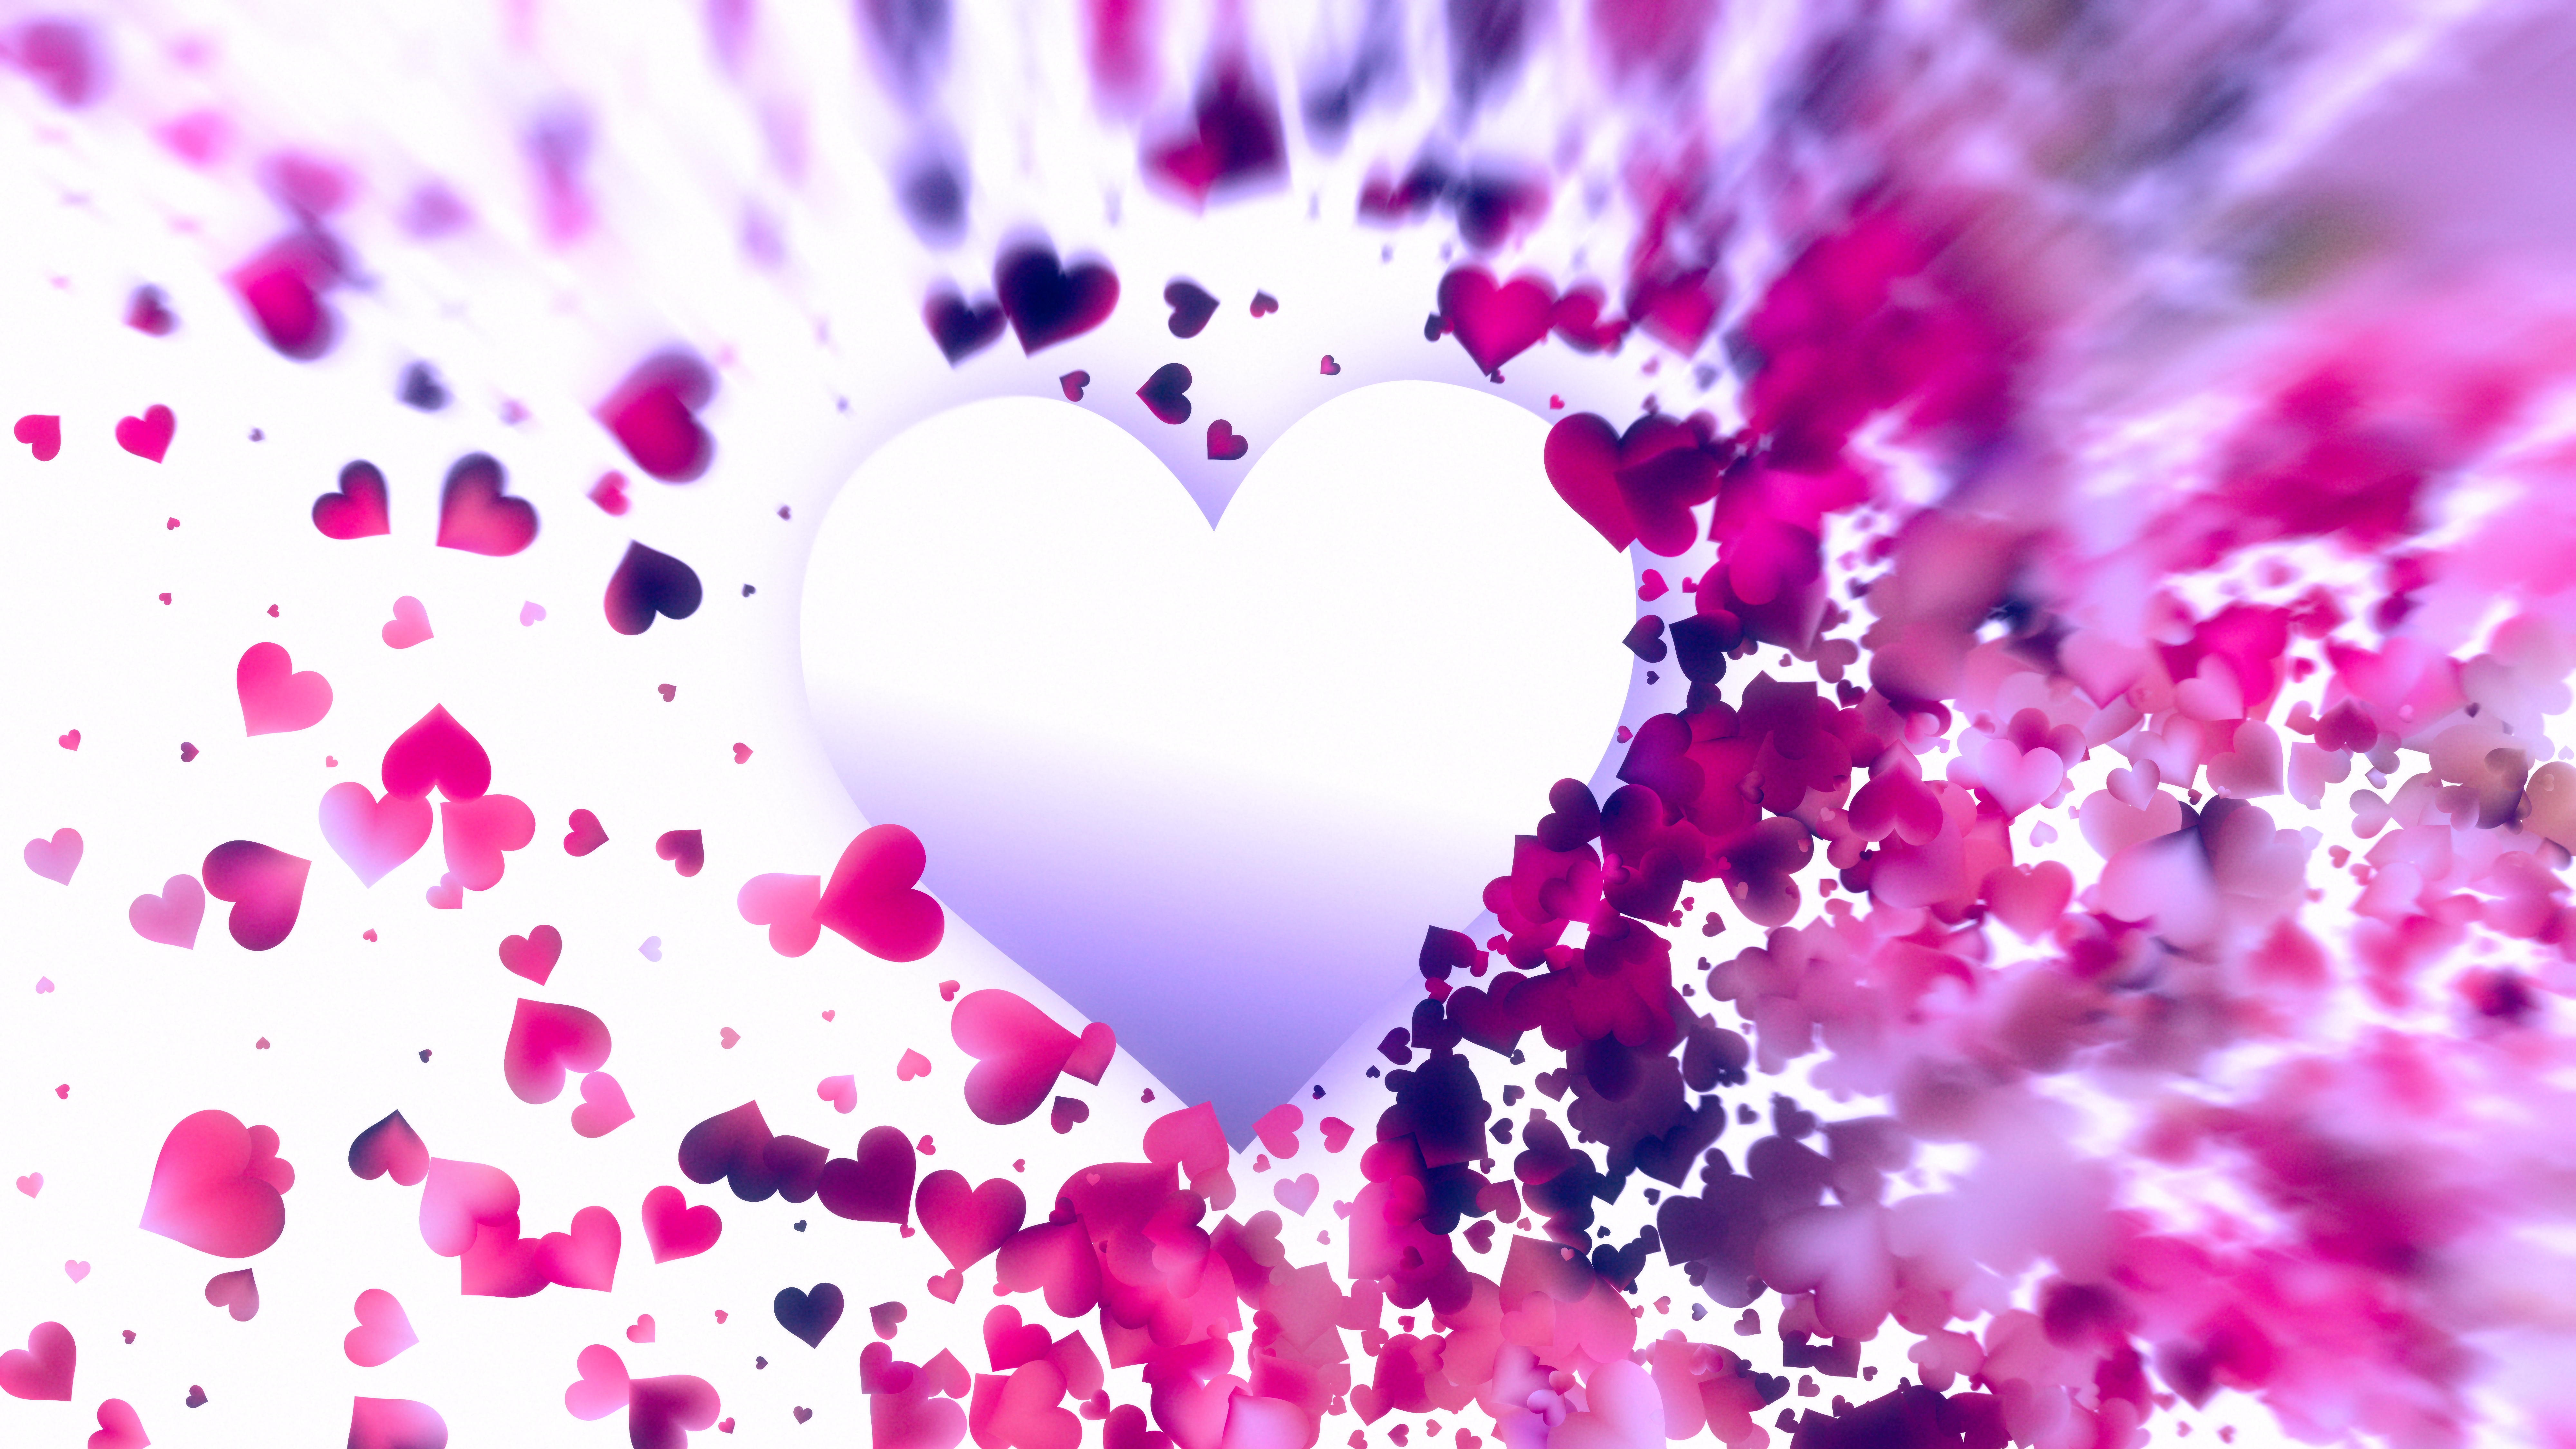 Free Blurred Pink Purple and White Heart Wallpaper Background Image